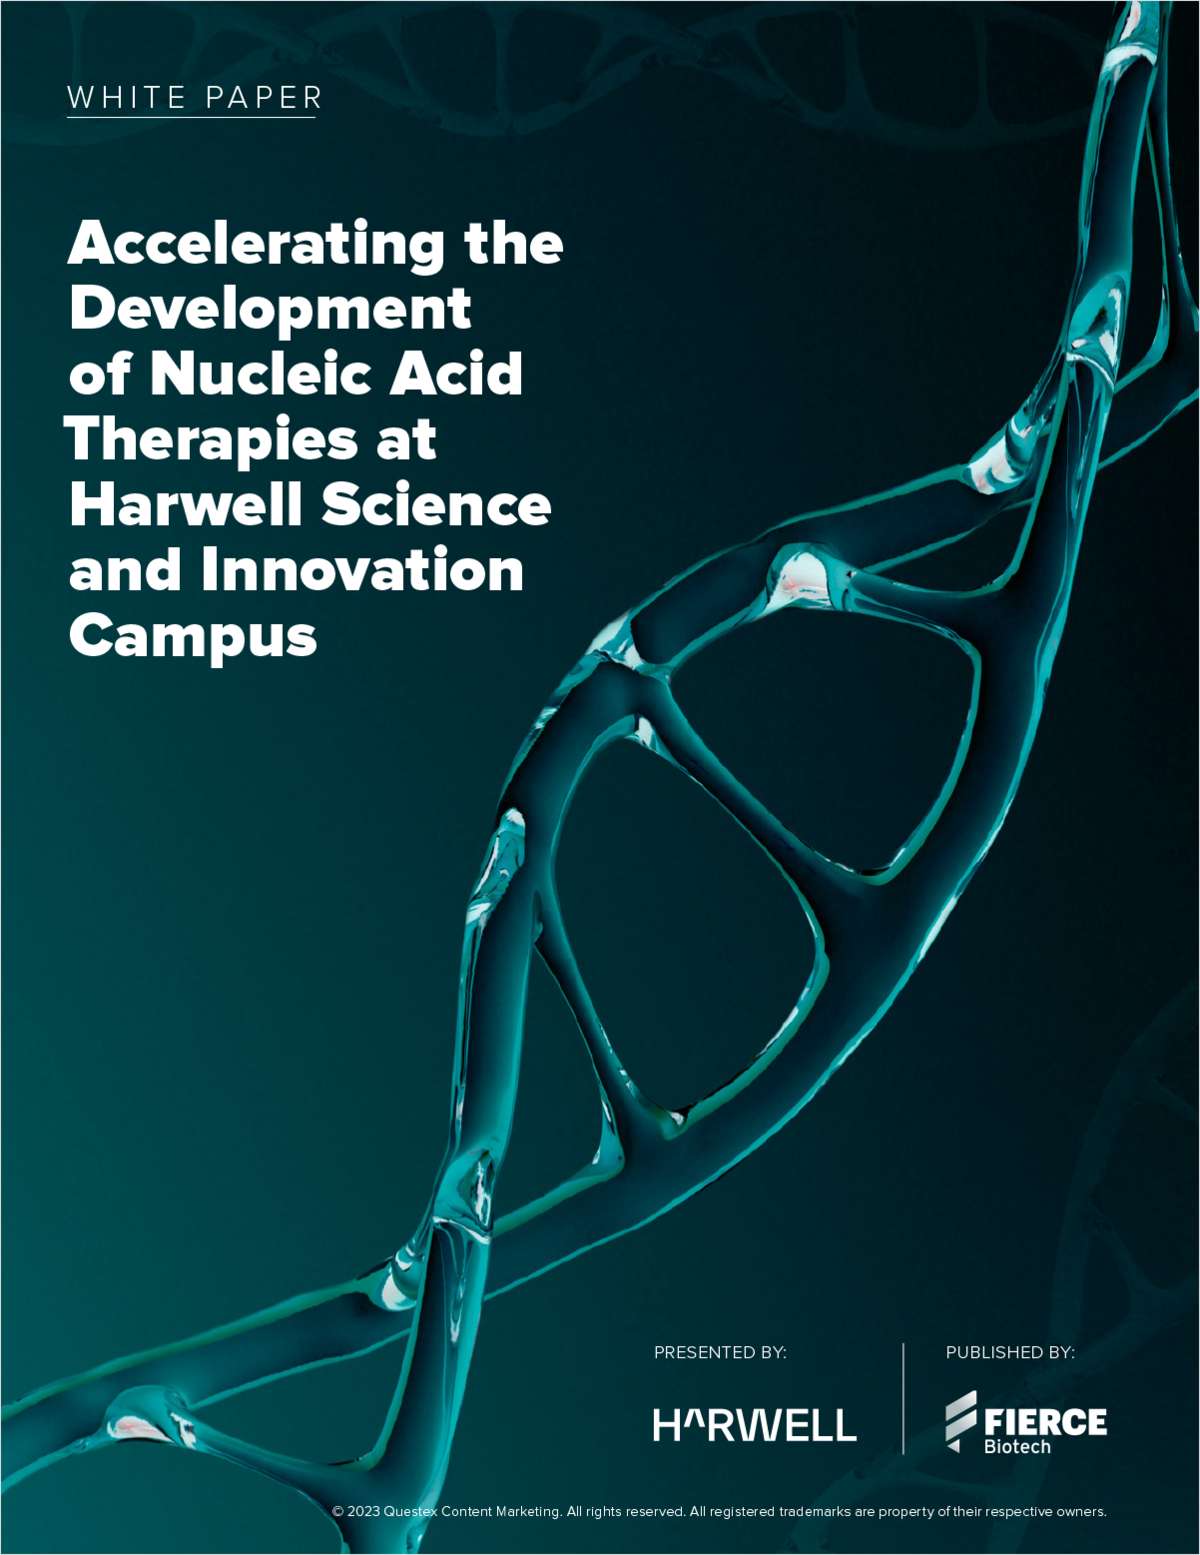 Accelerating the Development of Nucleic Acid Therapies